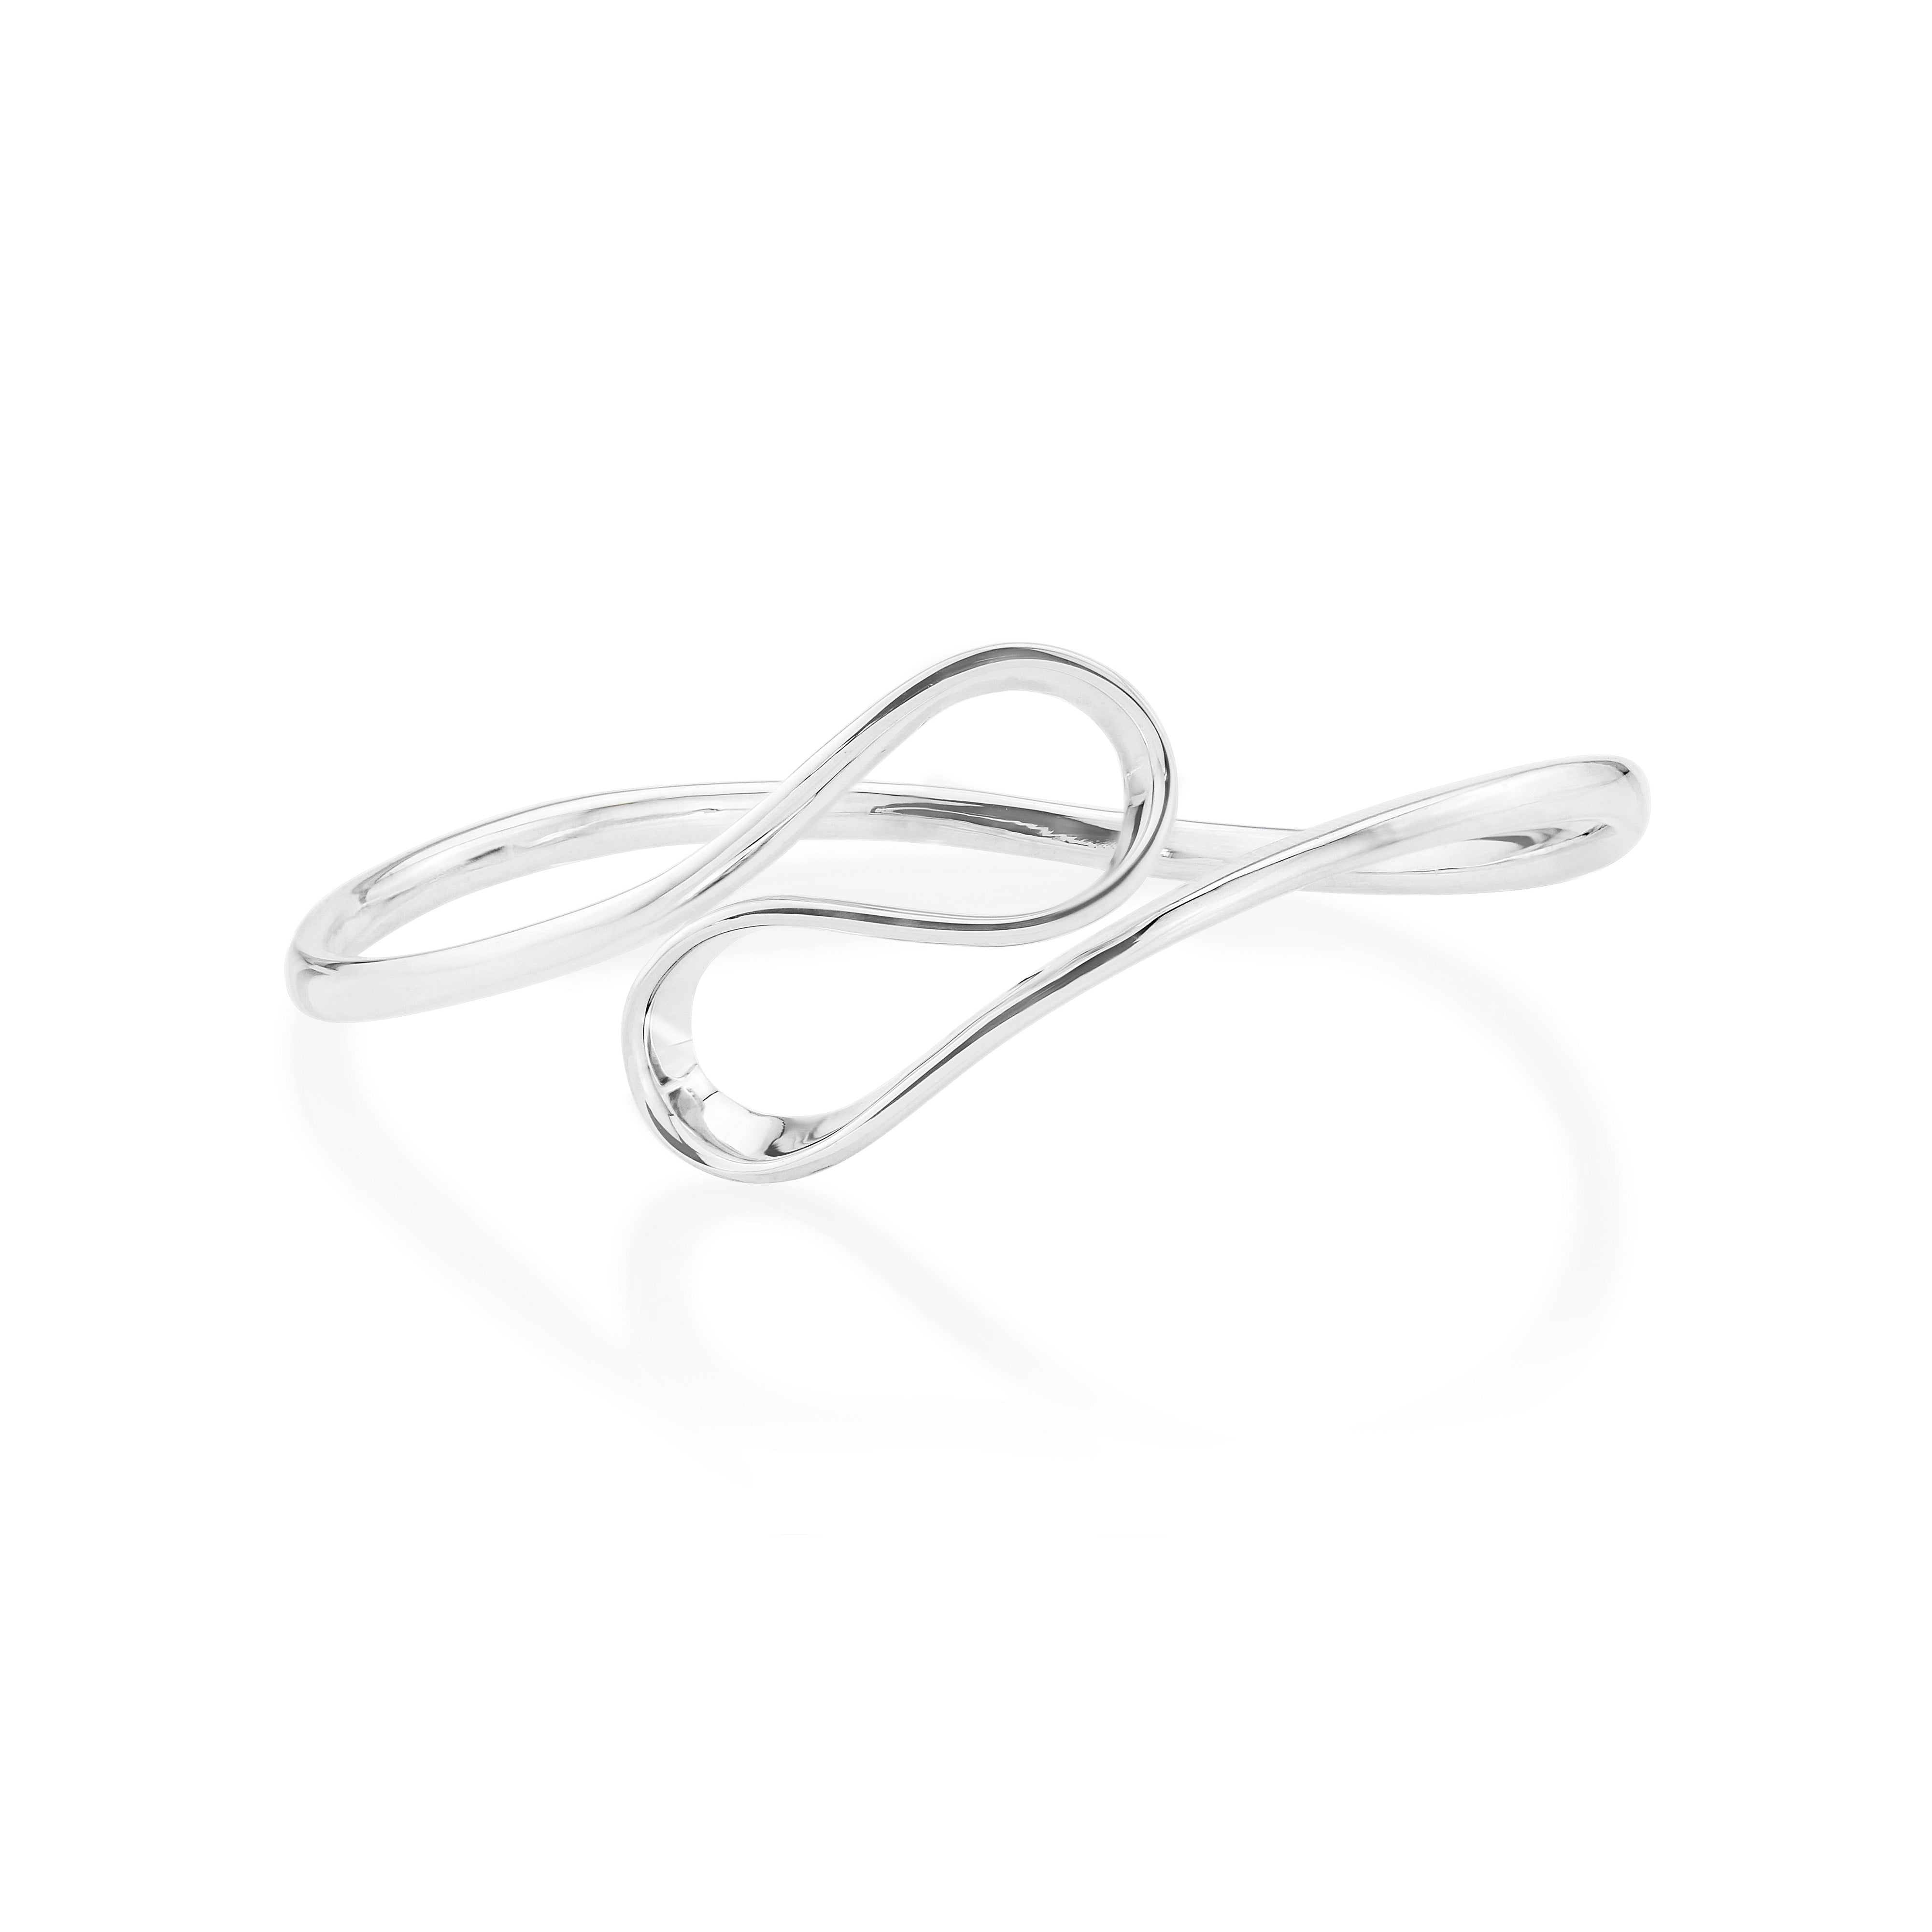 Handmade Silver Bangle with Figure of Eight Design